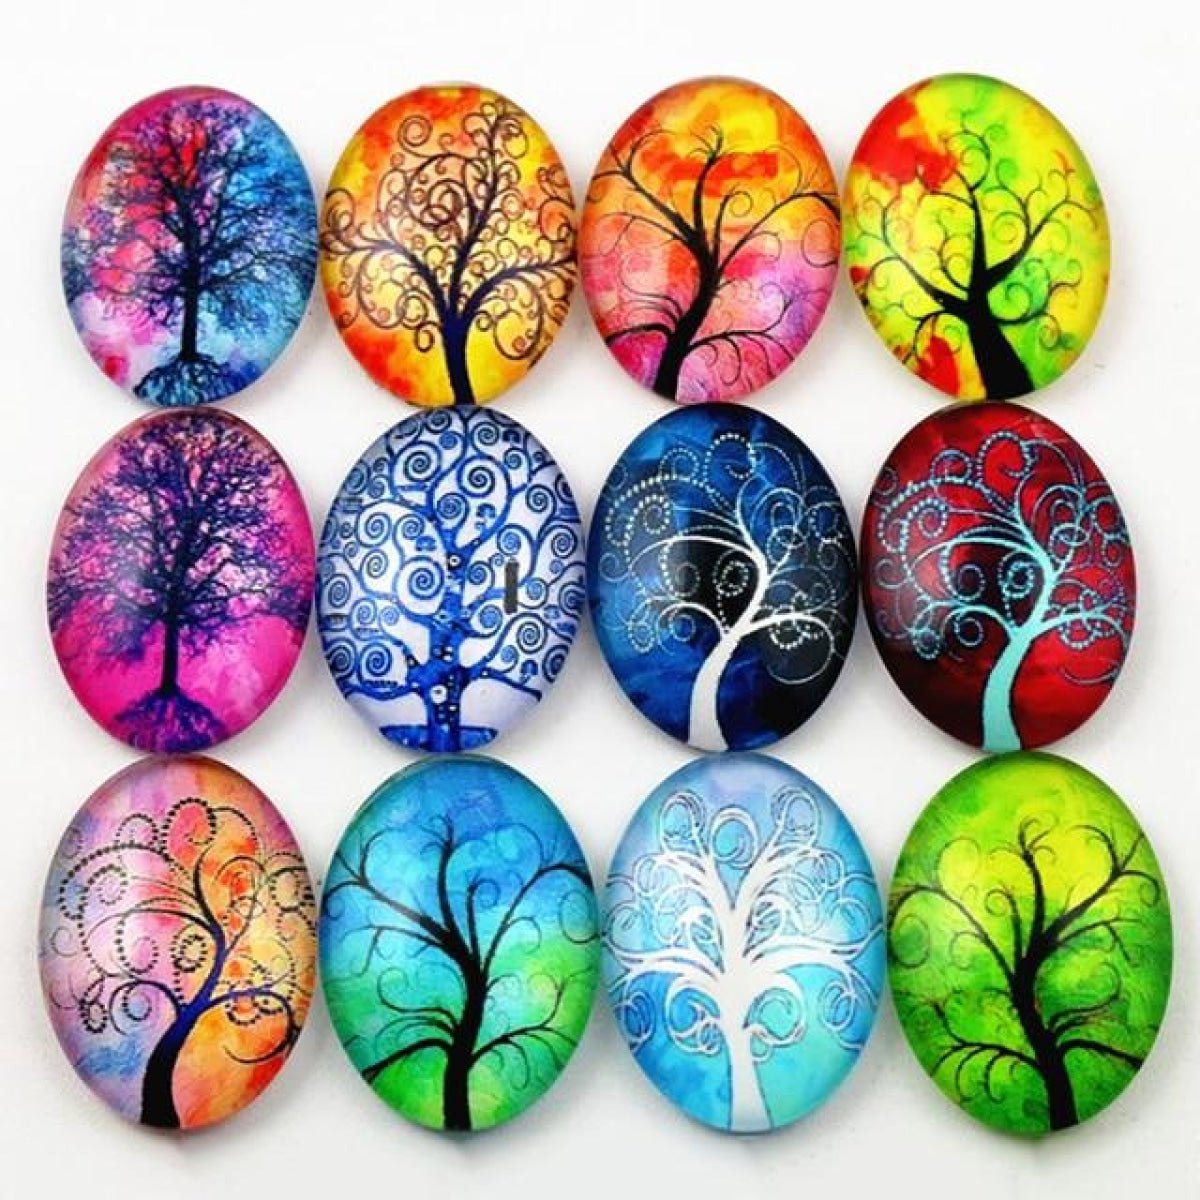 10x Glass Cabochons Flower Tree Life Handmade Oval Shape 18x25mm Jewellery Set A - Swirling Branches - - Asia Sell